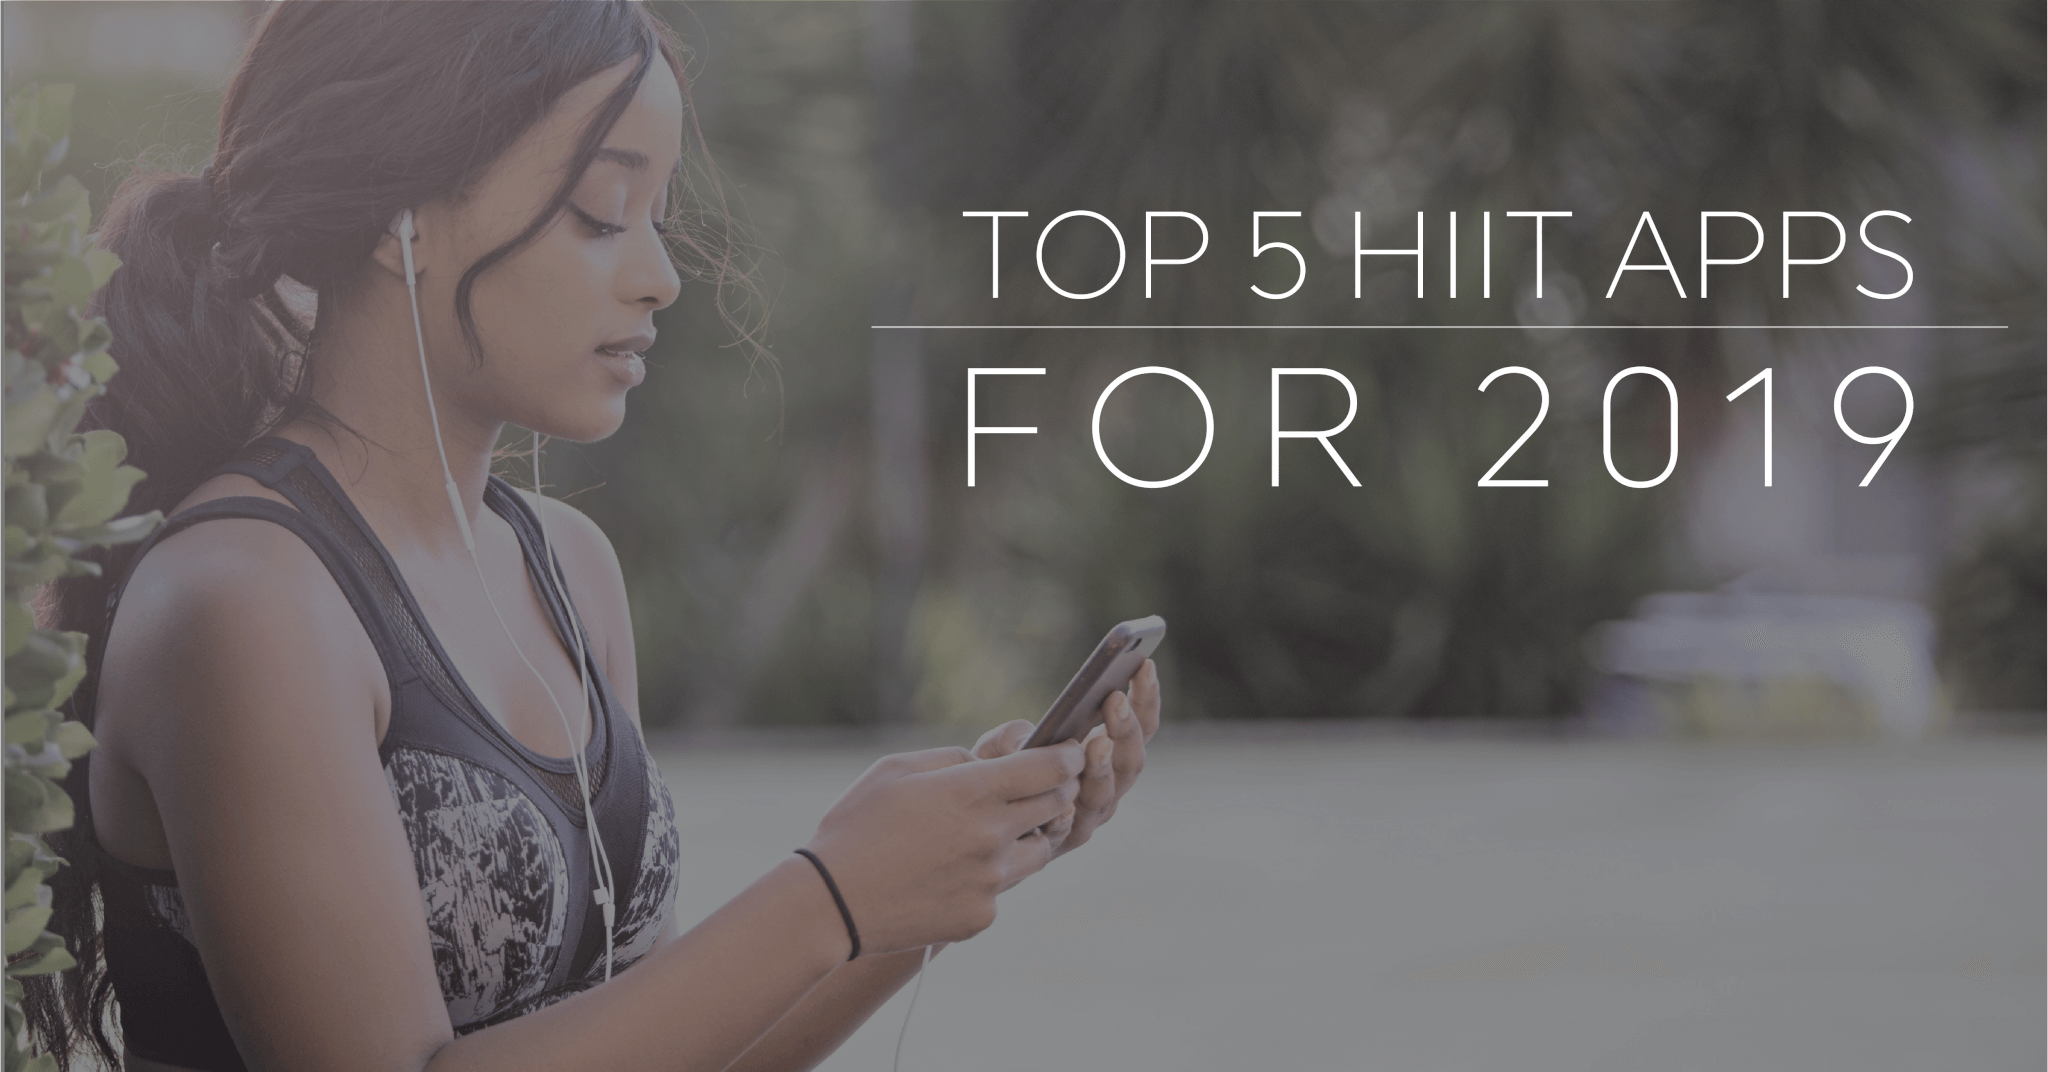 Top 5 HIIT Apps That You Should Download For 2019